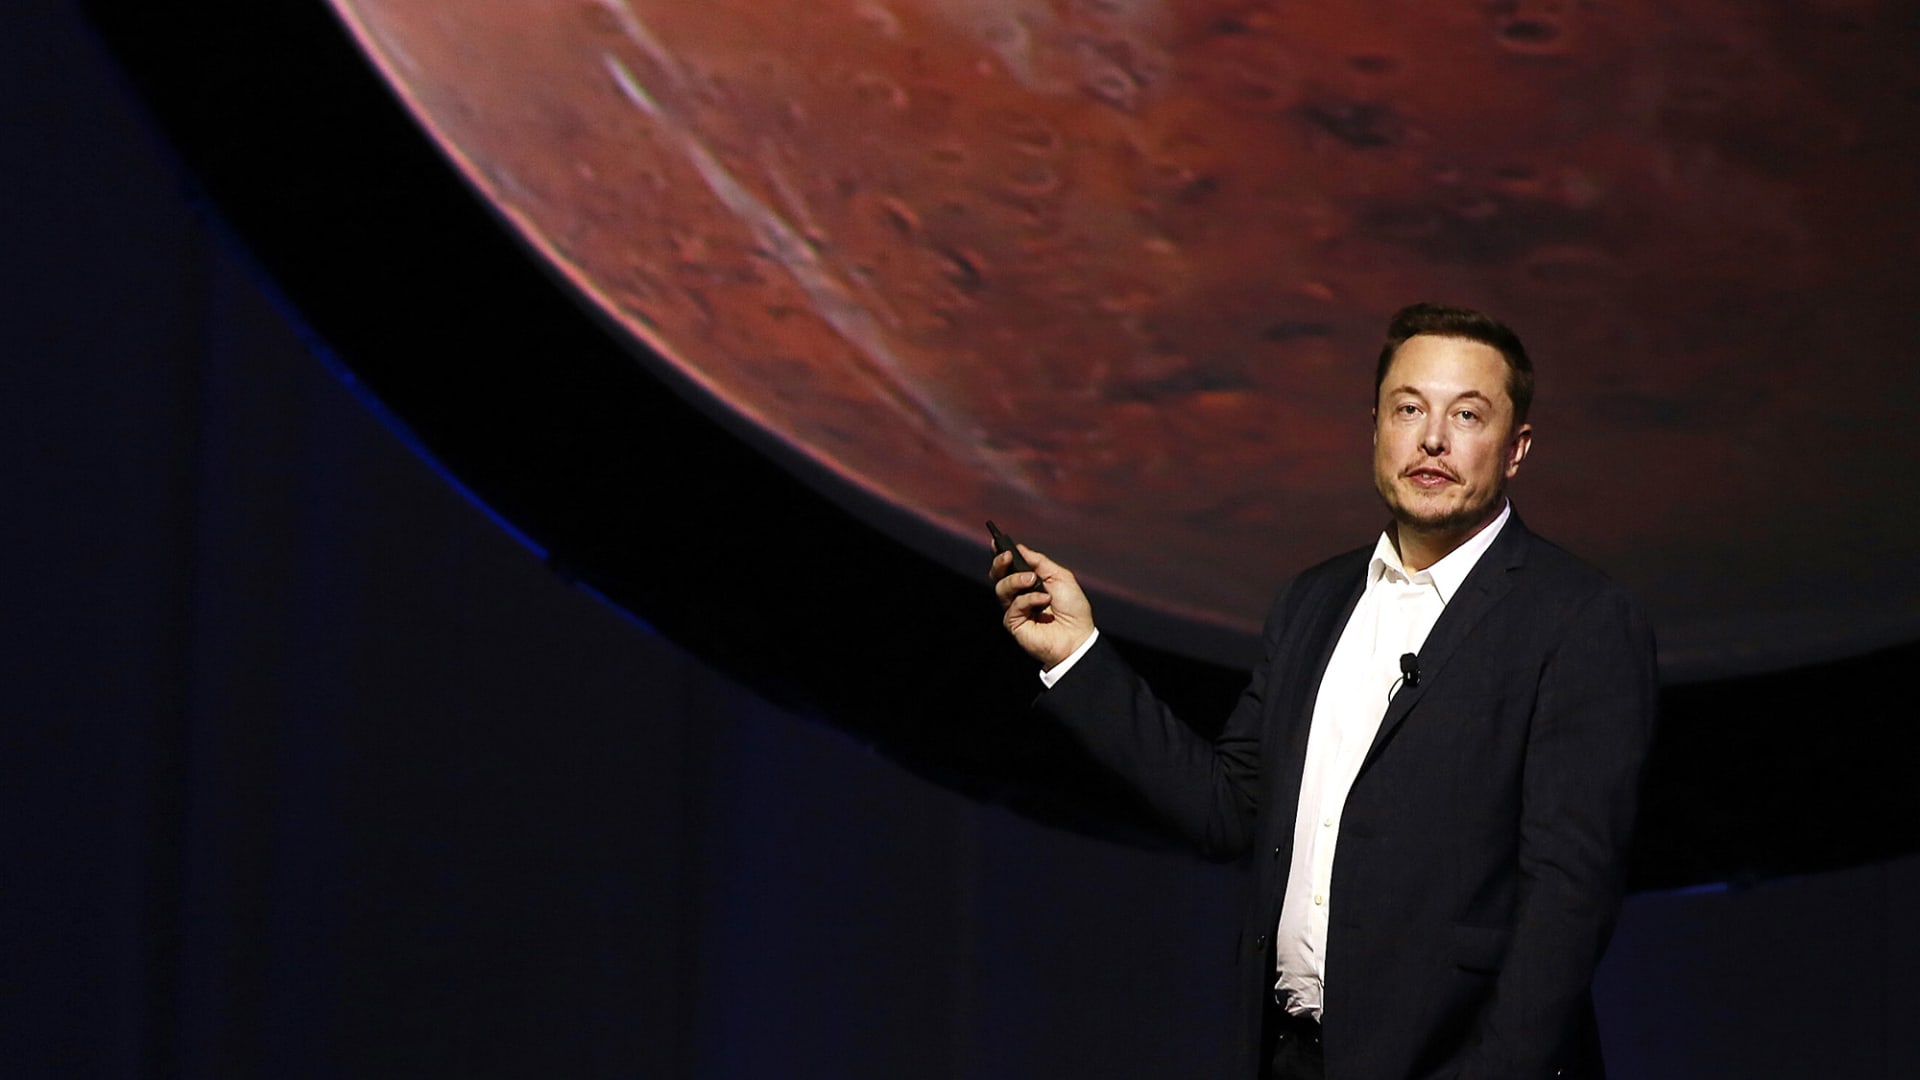 Bill Gates says Elon Musk’s ambition to colonize Mars is not a good use of money